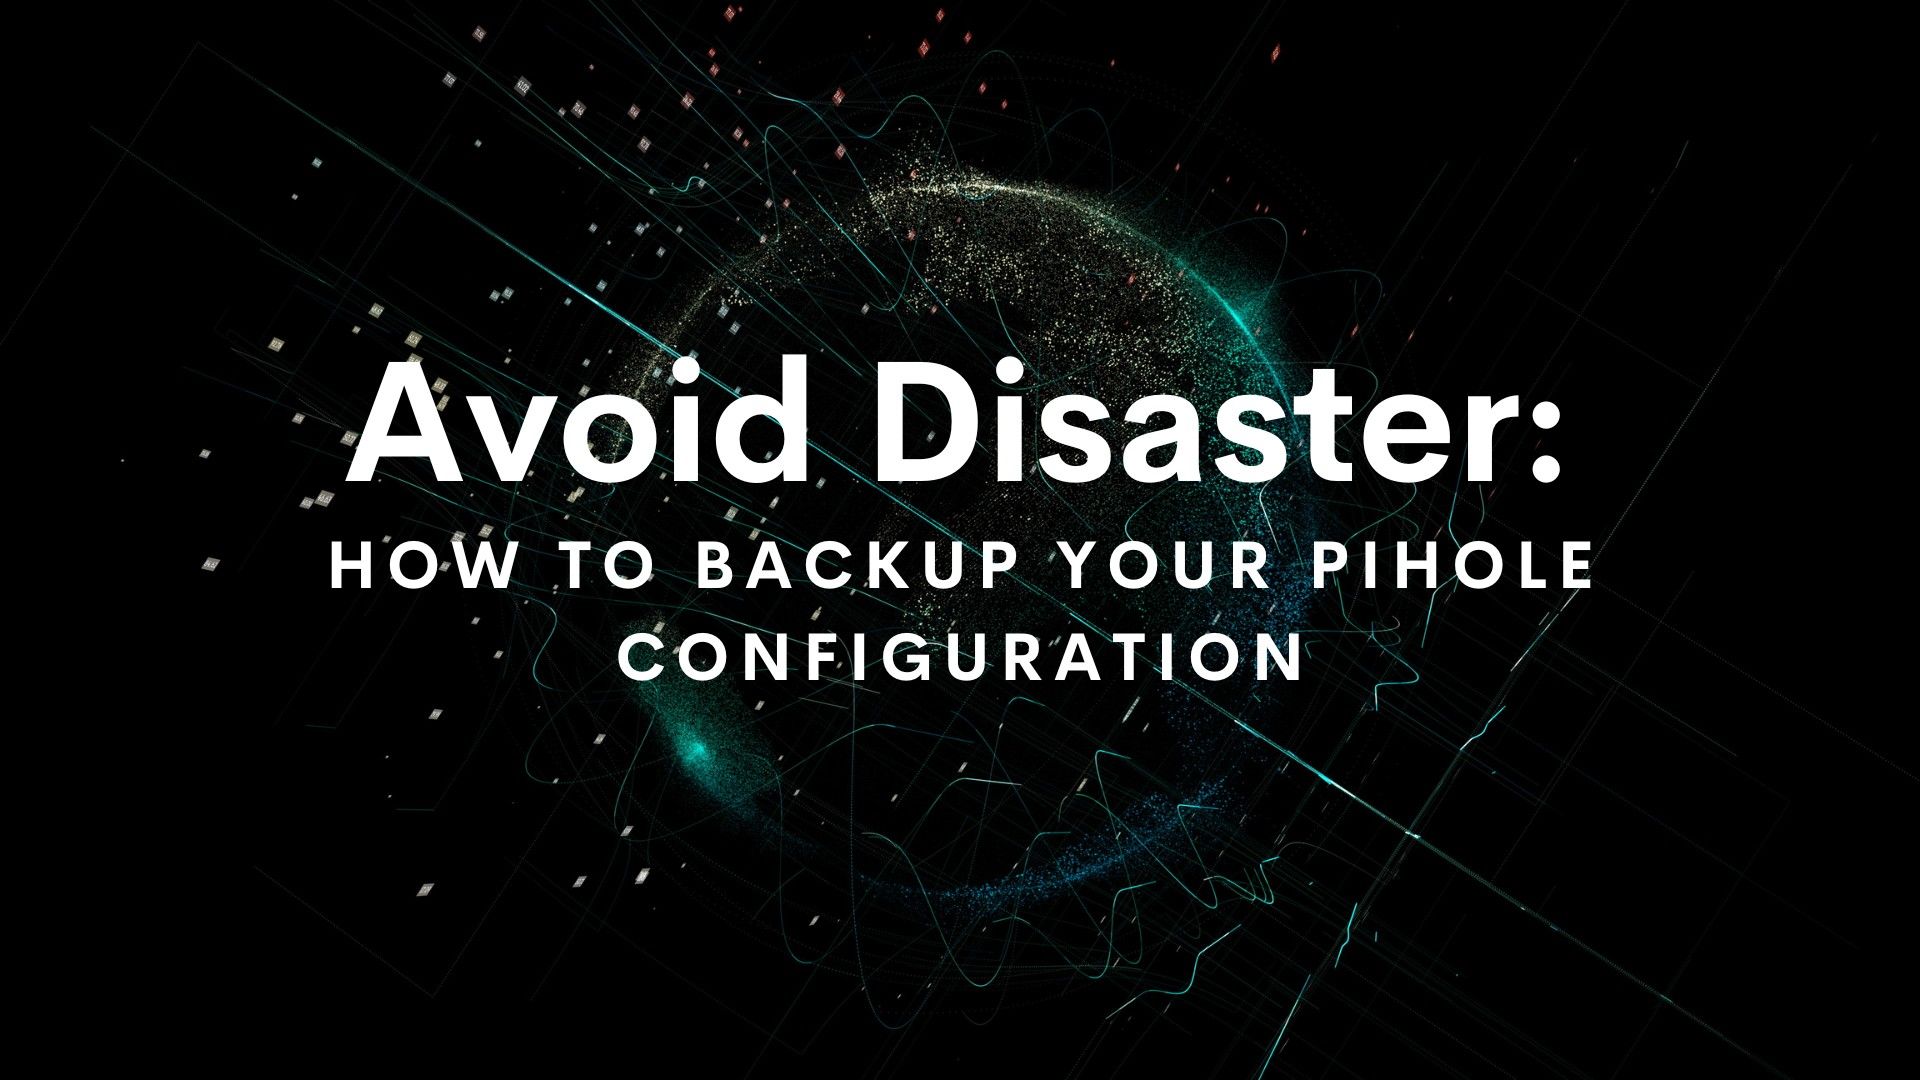 Avoid Disaster: How to Securely Backup Your Pihole Configuration and Keep Your Network Running Smoothly